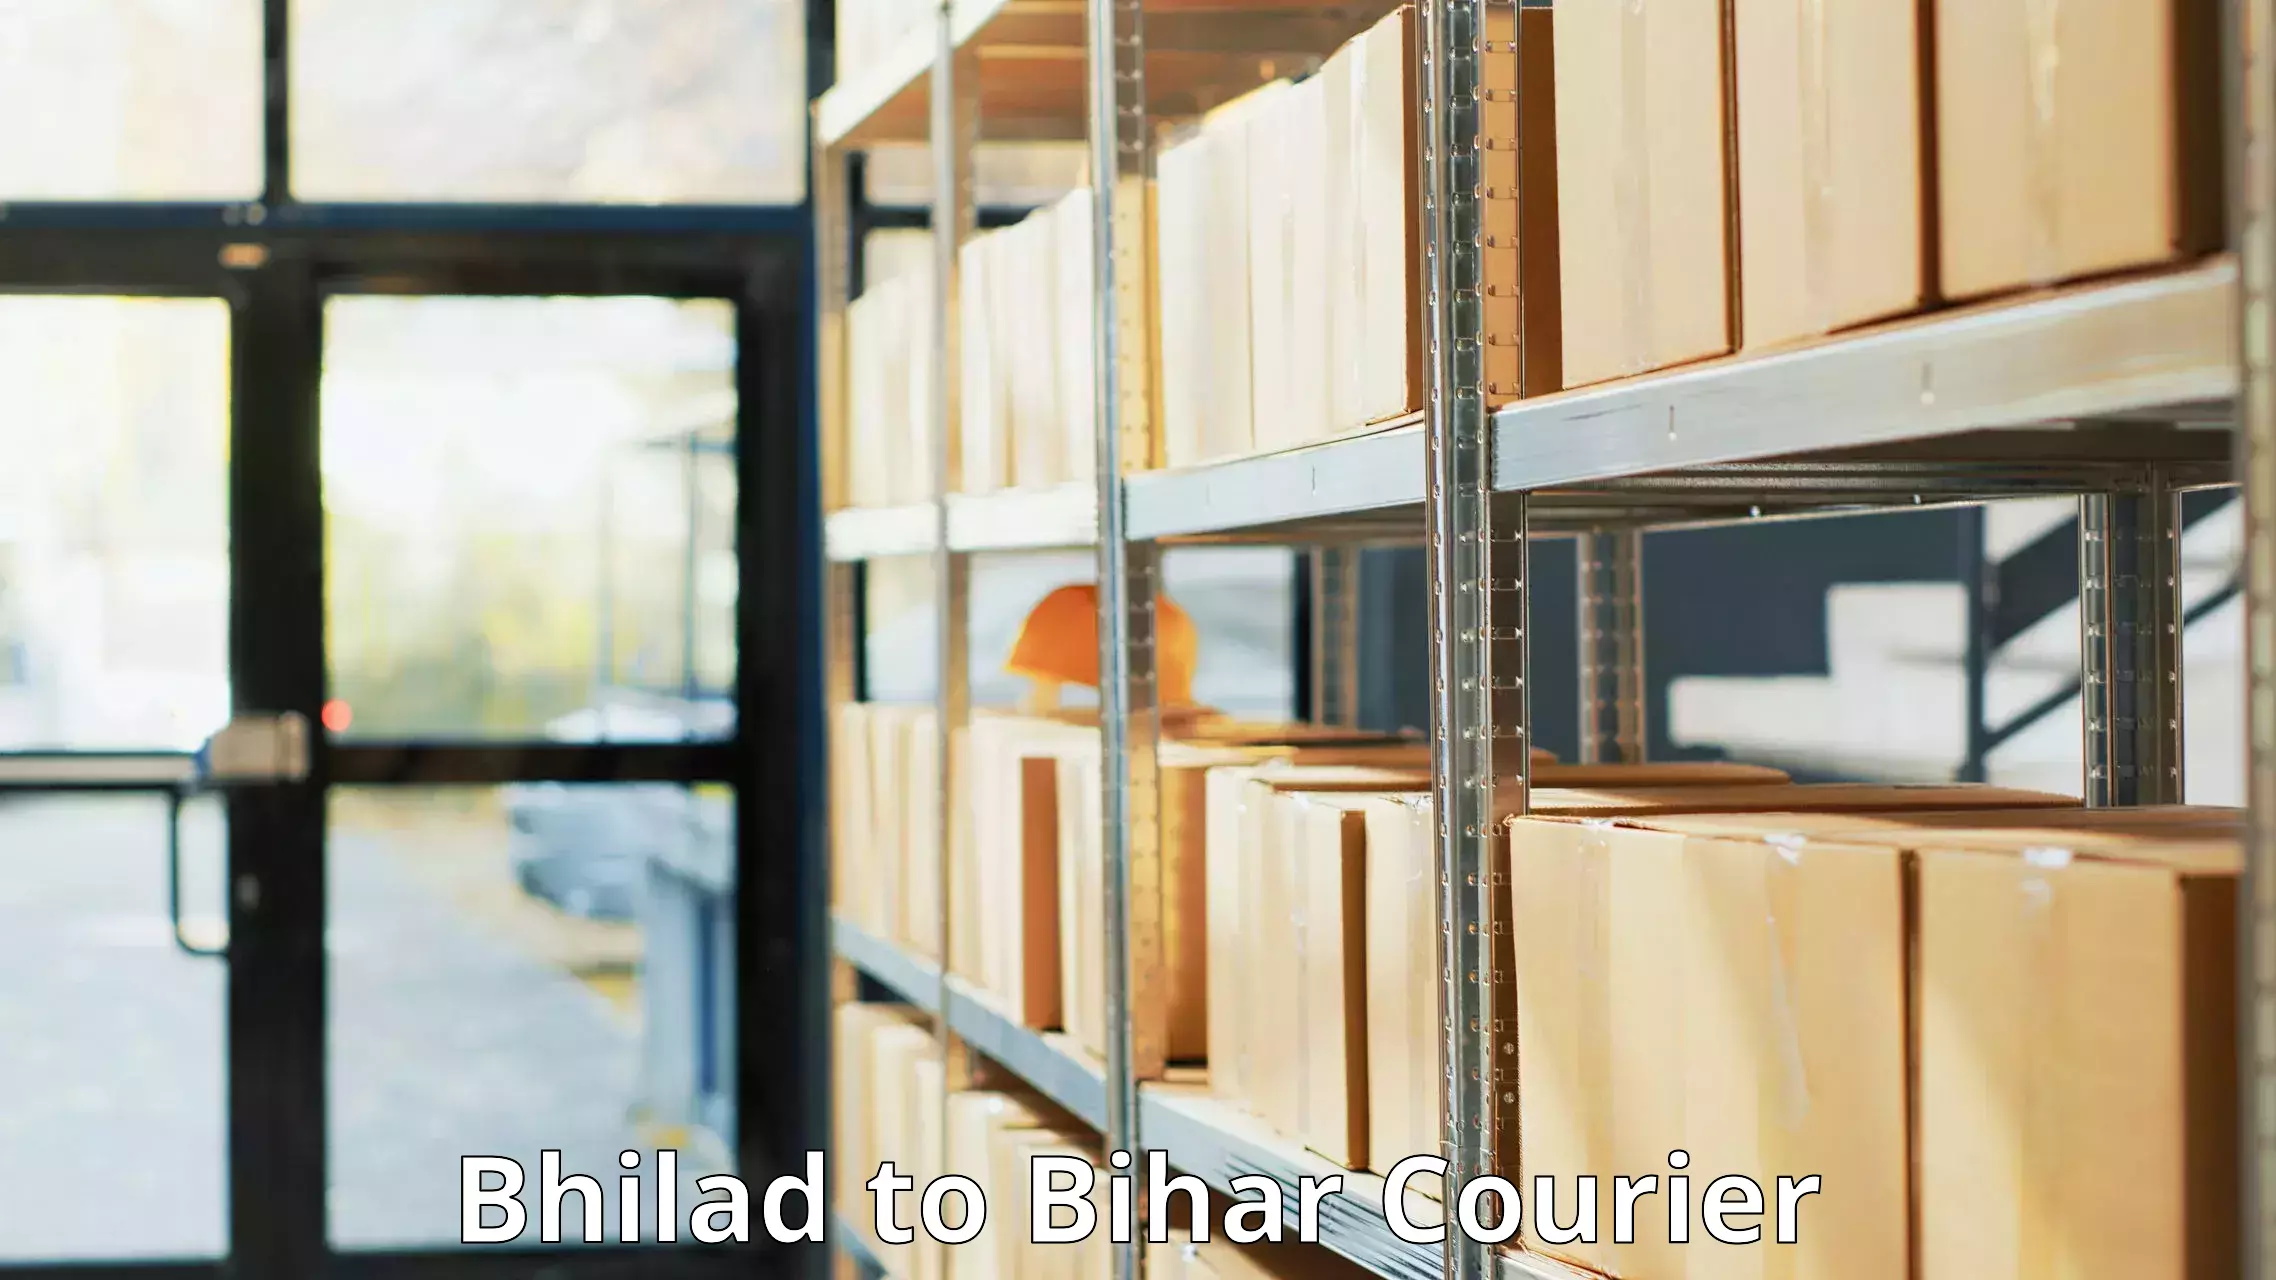 Reliable parcel services Bhilad to Dhaka